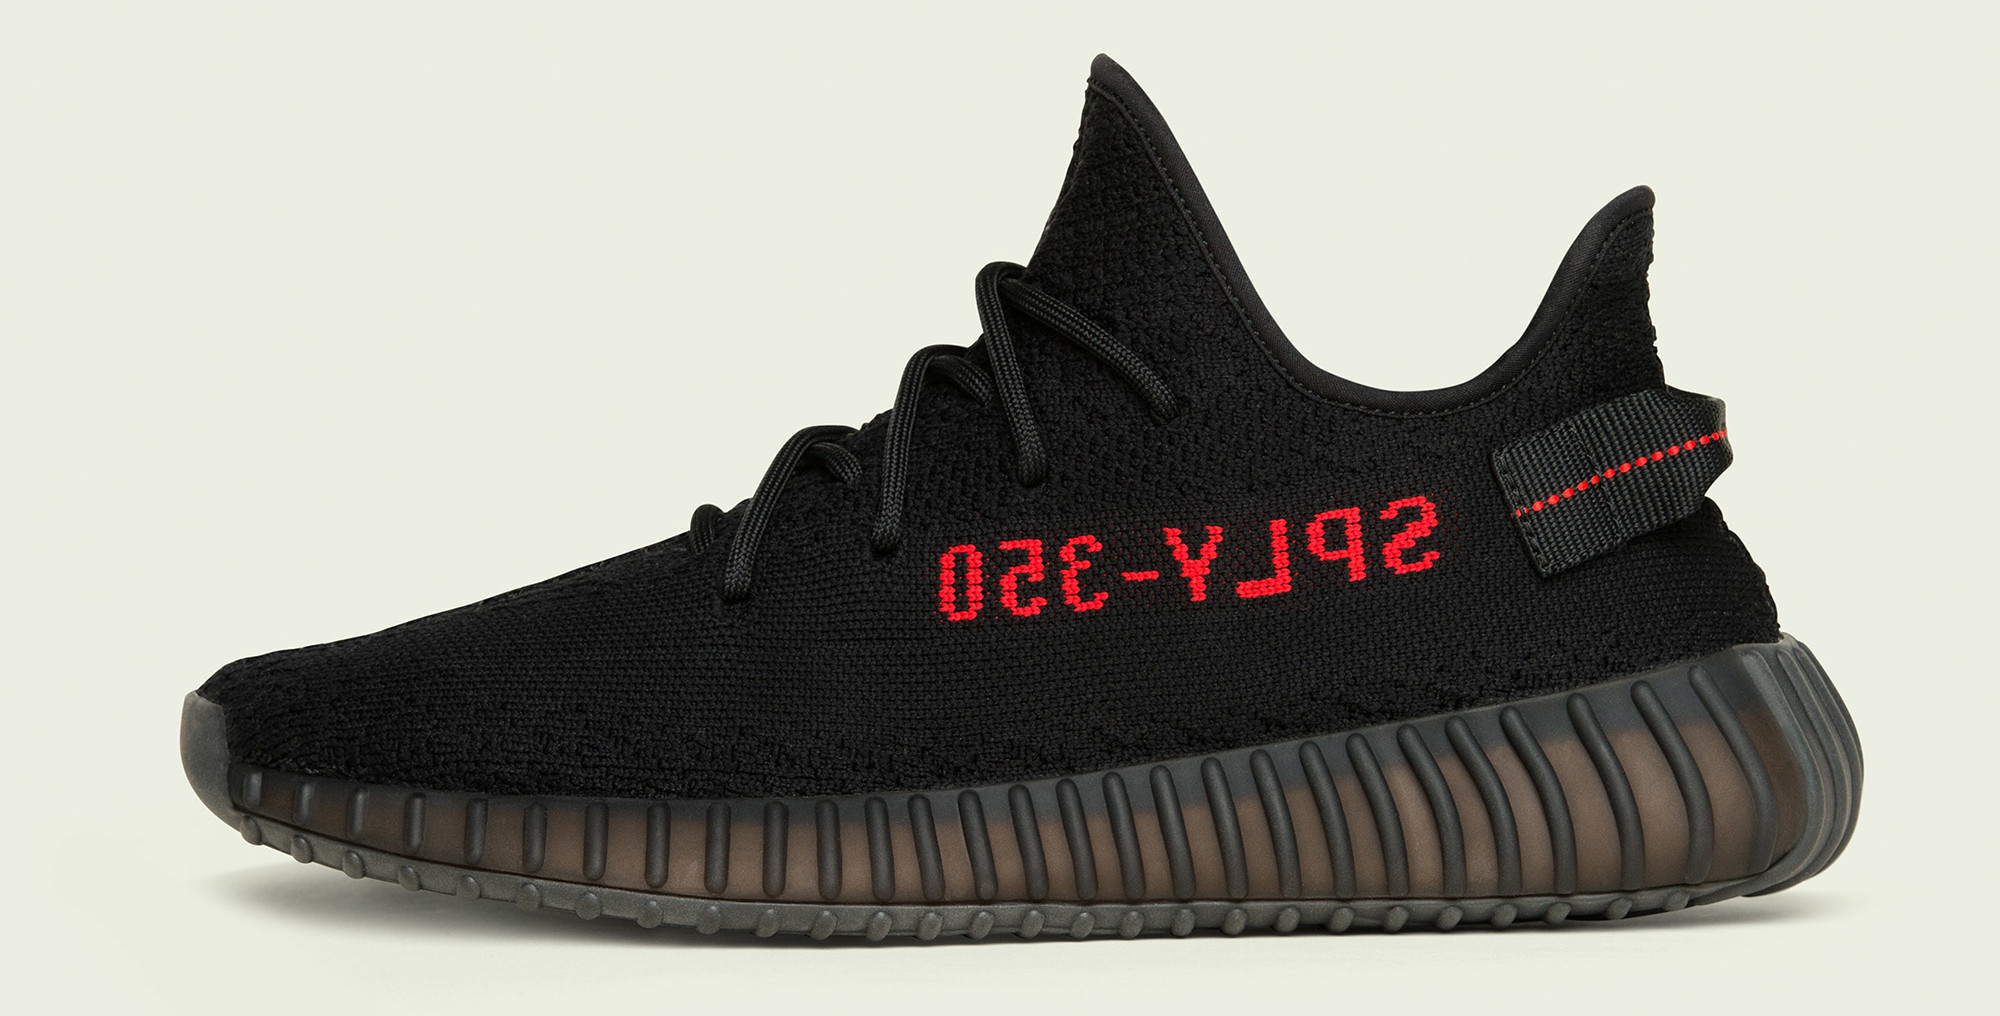 Adidas Yeezy Boost 350 V2 Black Red | Sole Collector